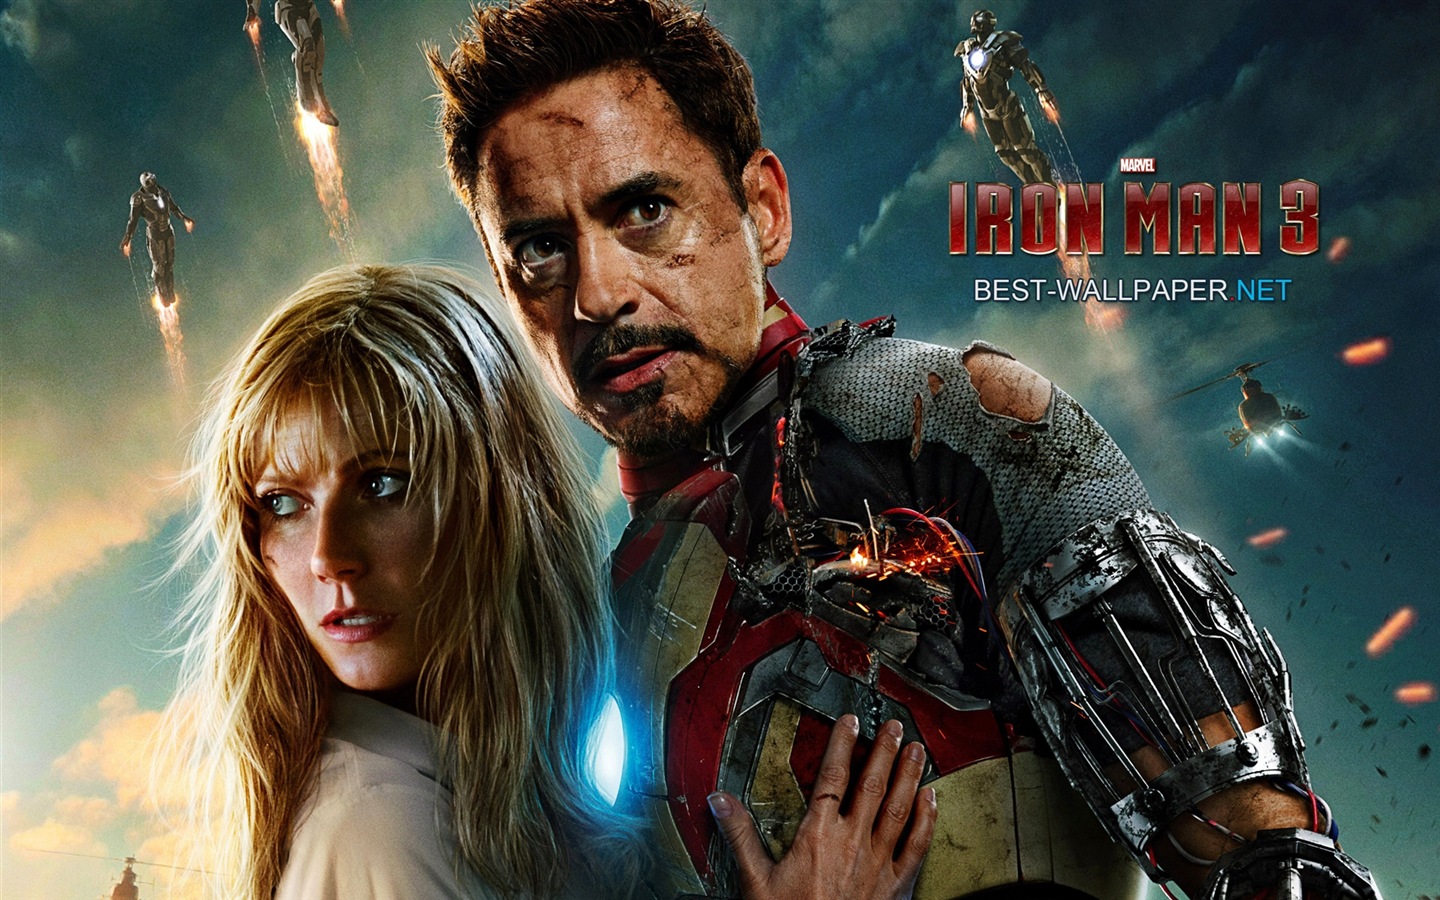 2013 Iron Man 3 newest HD wallpapers #13 - 1440x900